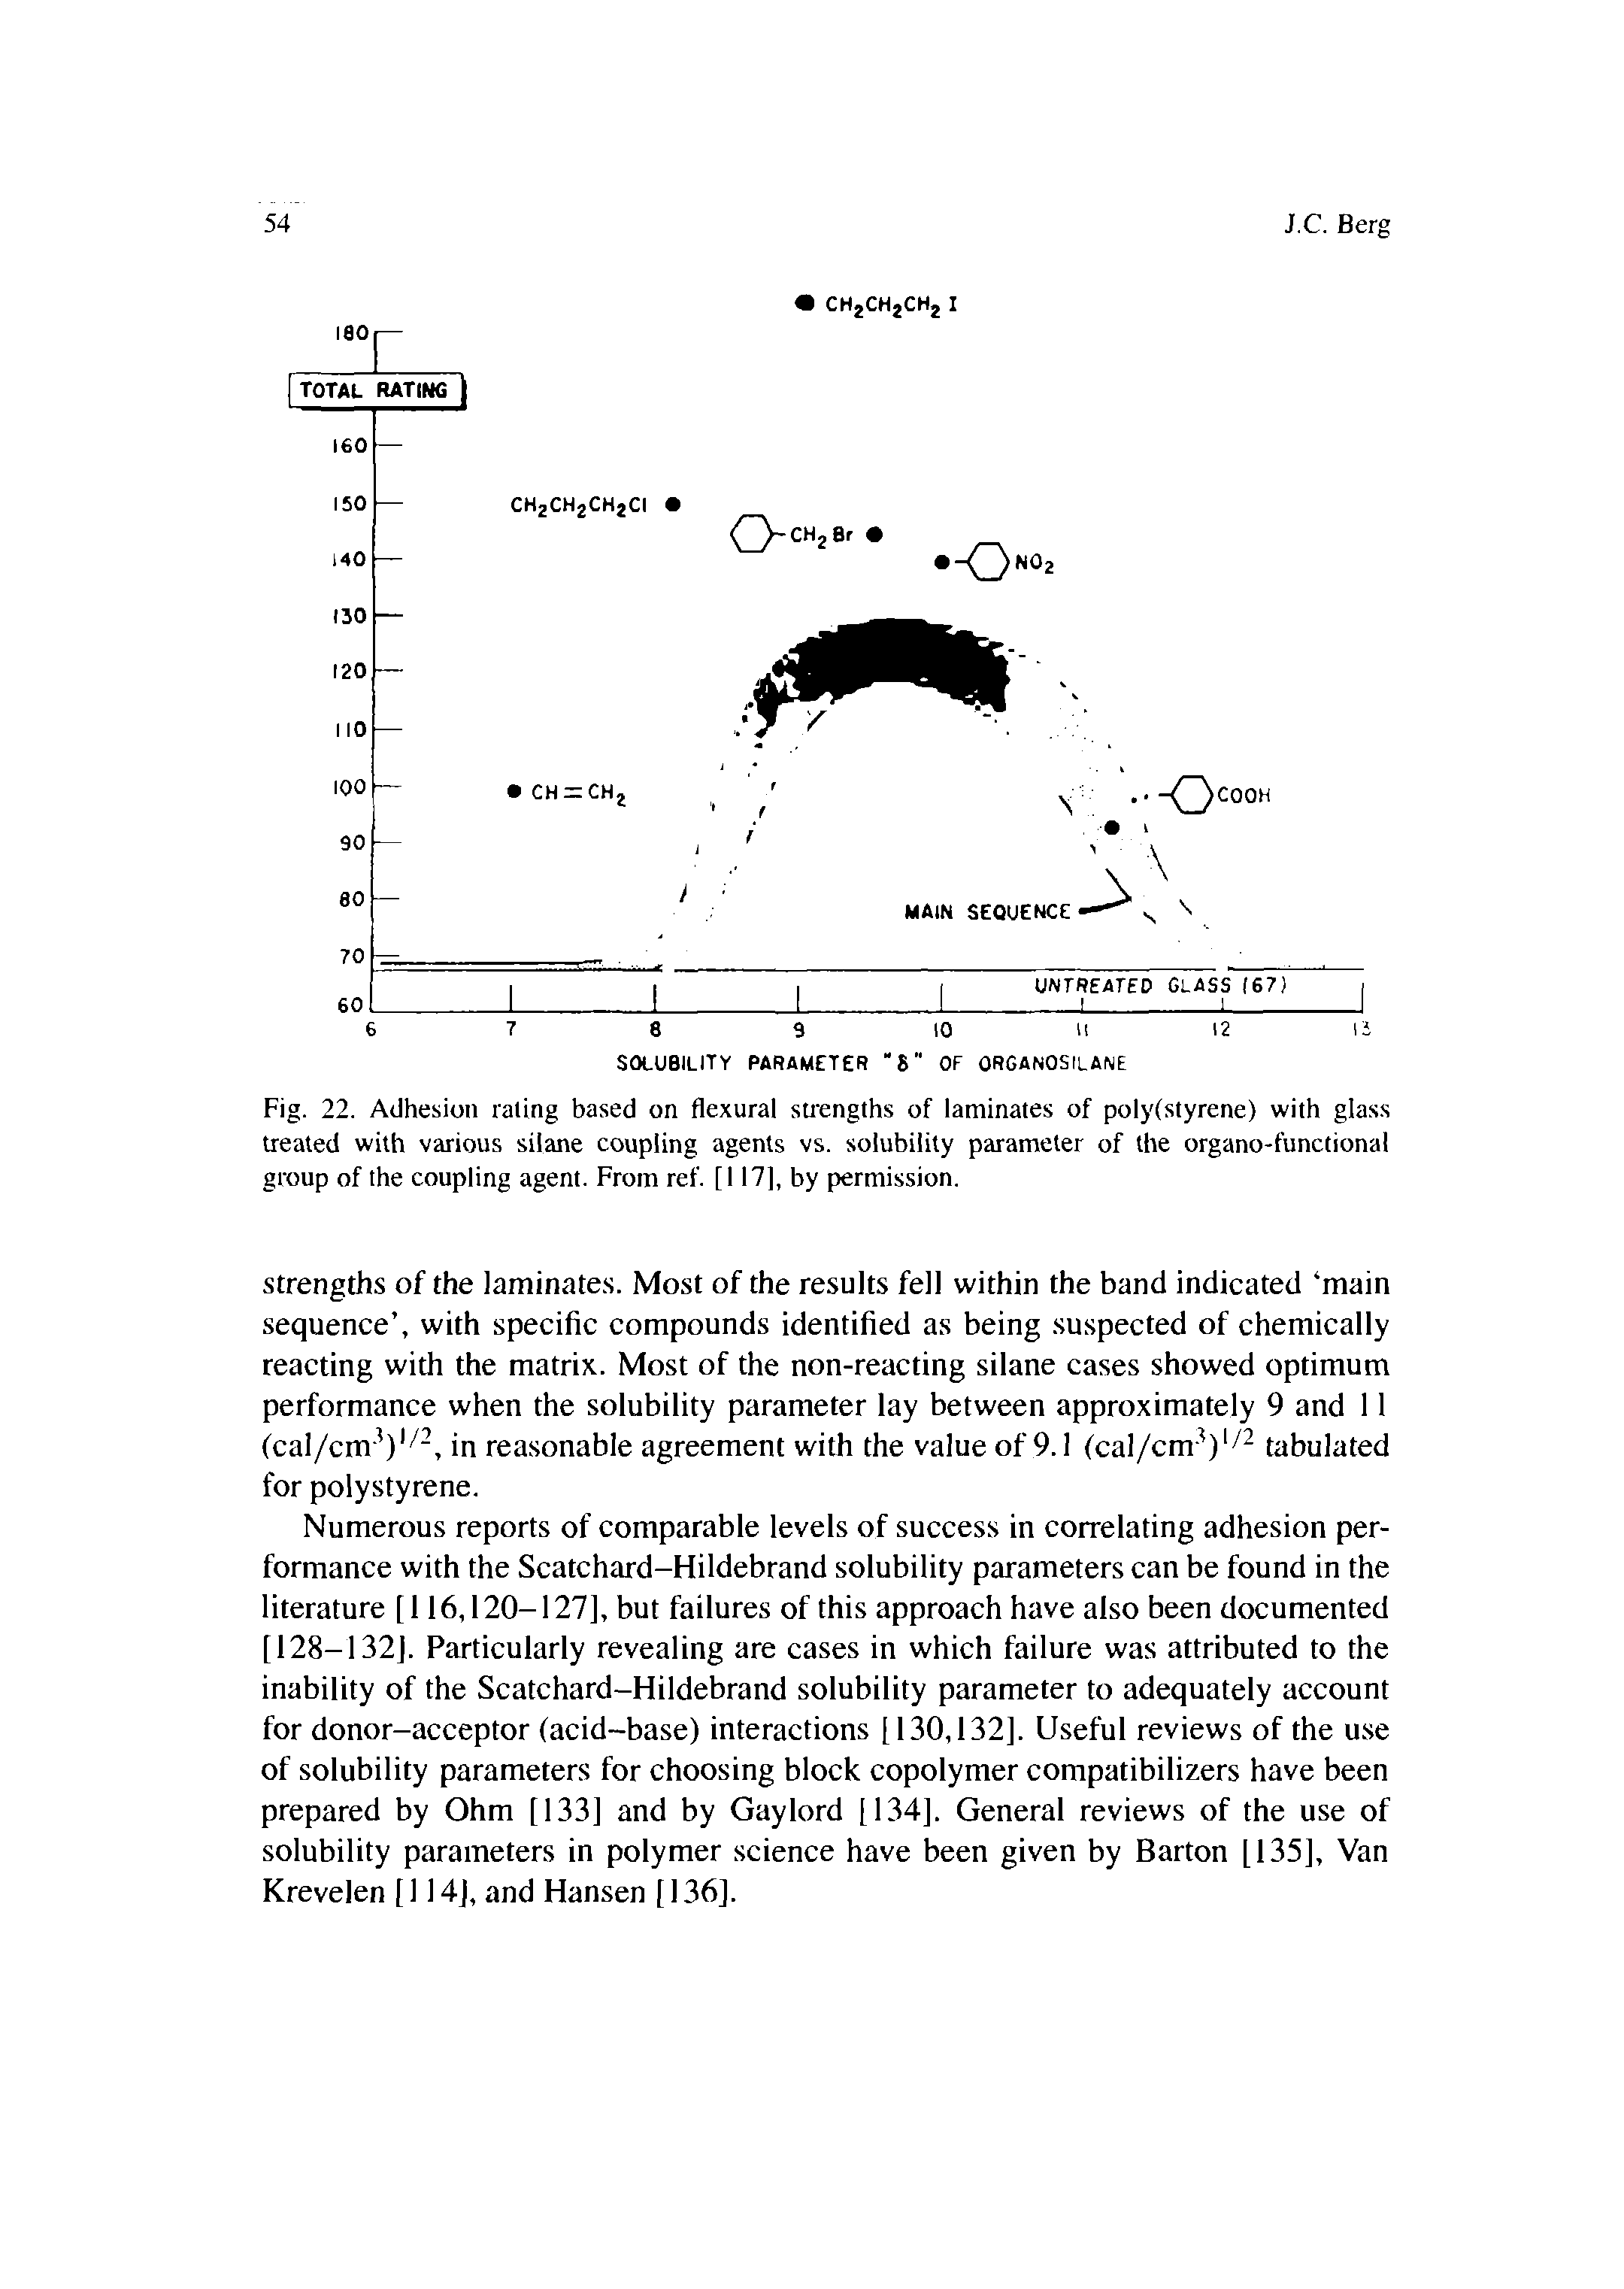 Fig. 22. Adhesion rating based on flexural sti engths of laminates of poly(styrene) with glass treated with various silane coupling agents vs. solubility parameter of the organo-functional group of the coupling agent. From ref. [117], by permission.